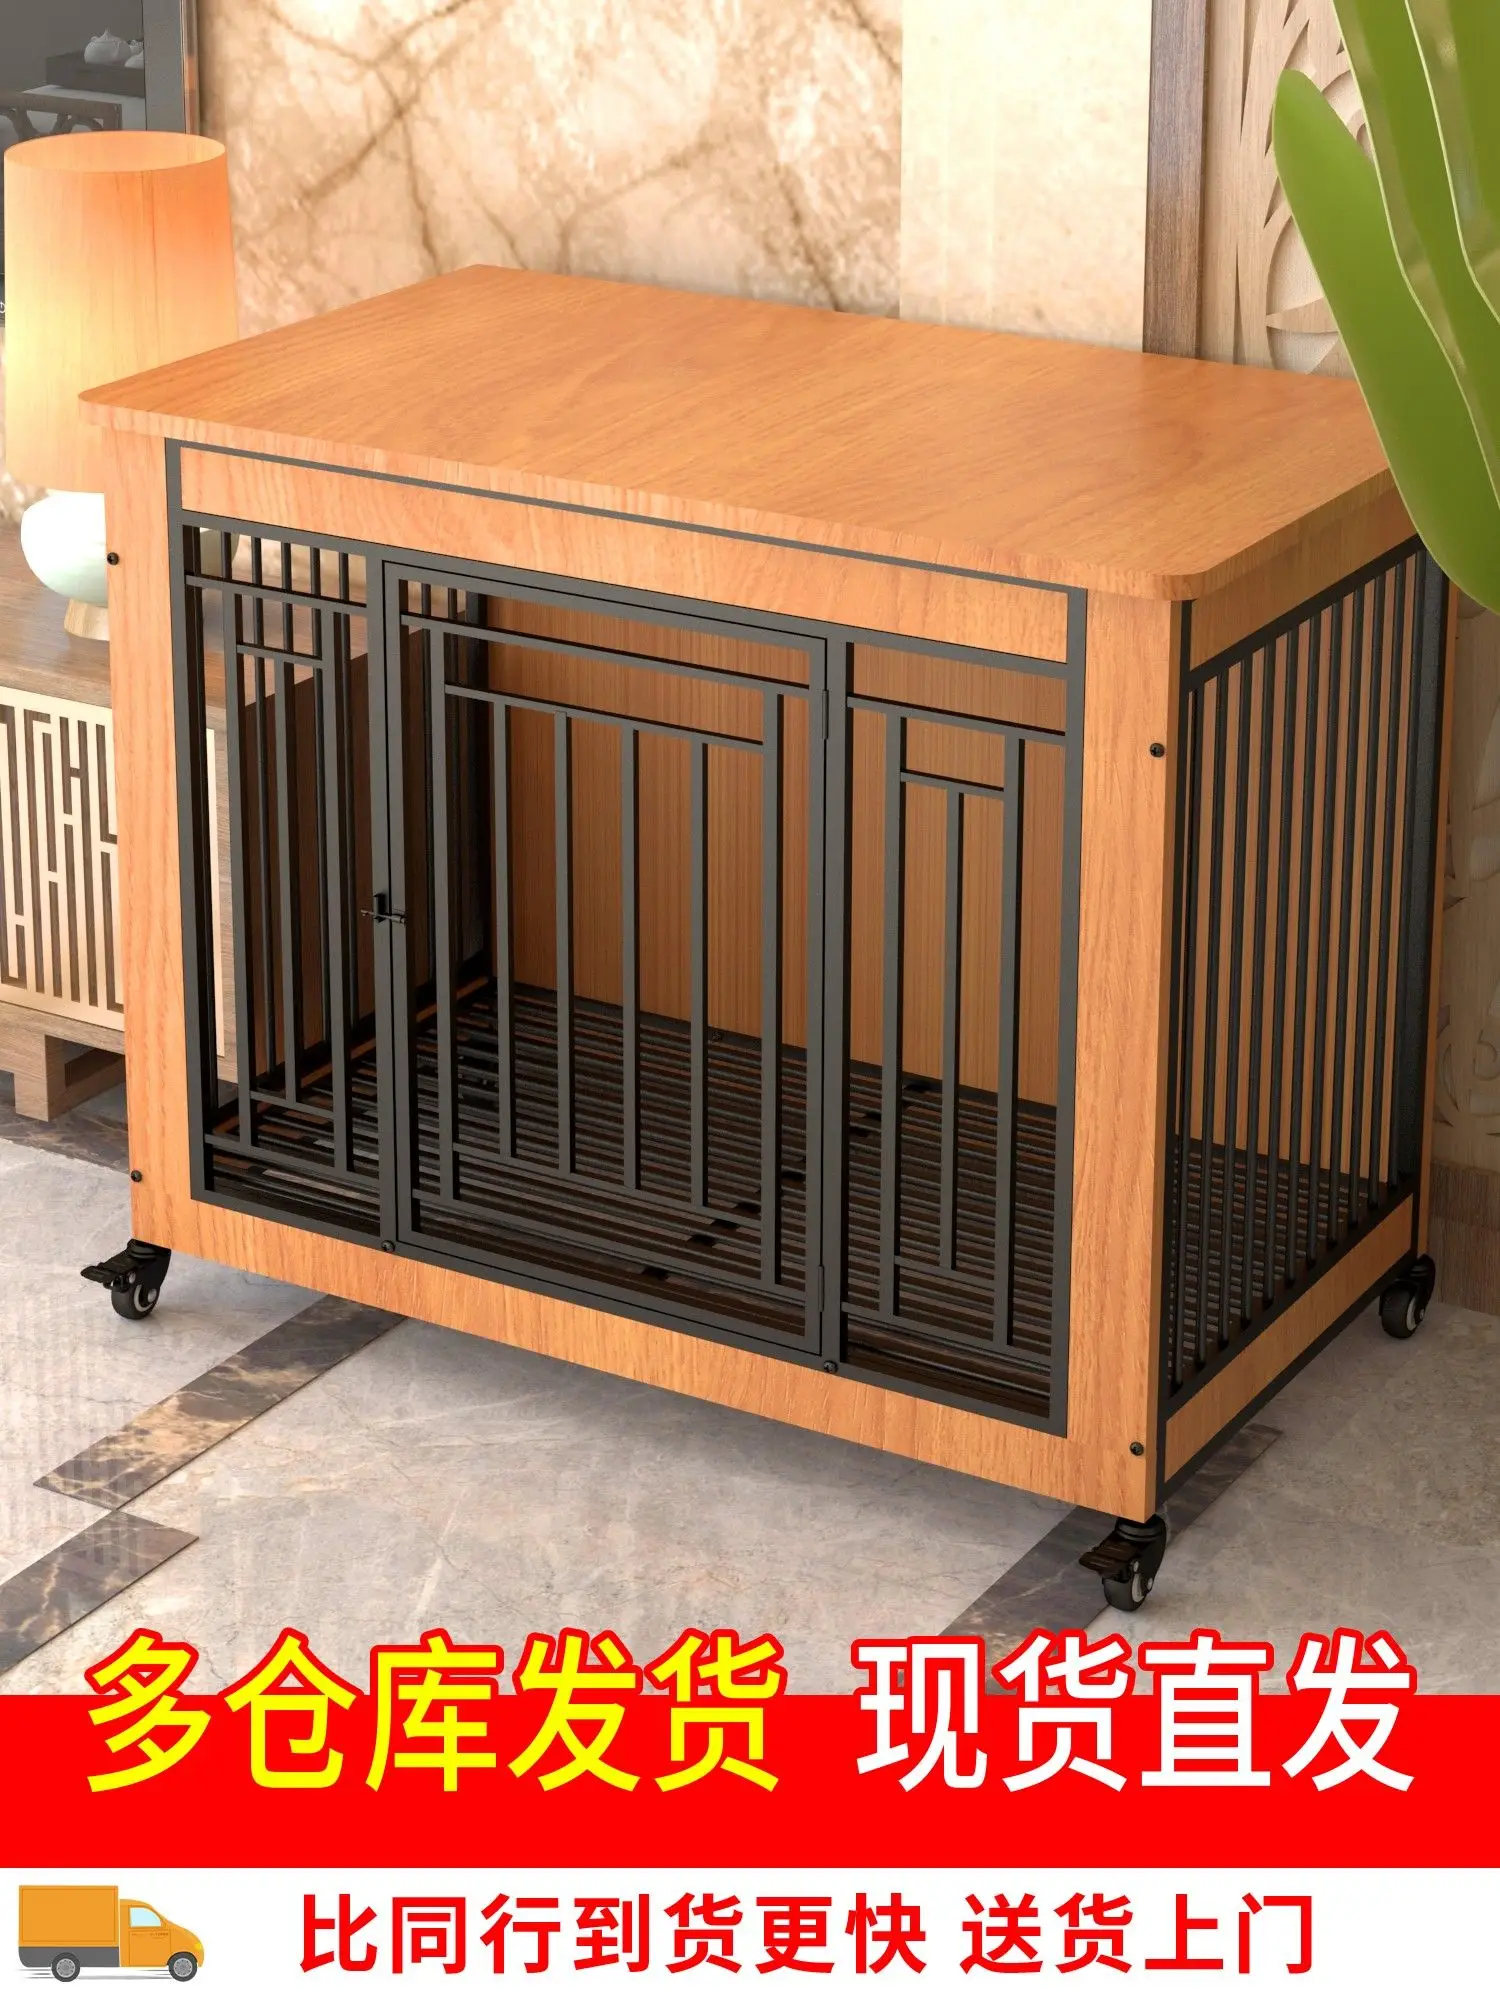 

Wooden Dog Crate Small, Medium and Large Dogs Solid Wood Pet Cage Indoor Villa with Toilet Labrador Golden Retriever Fence